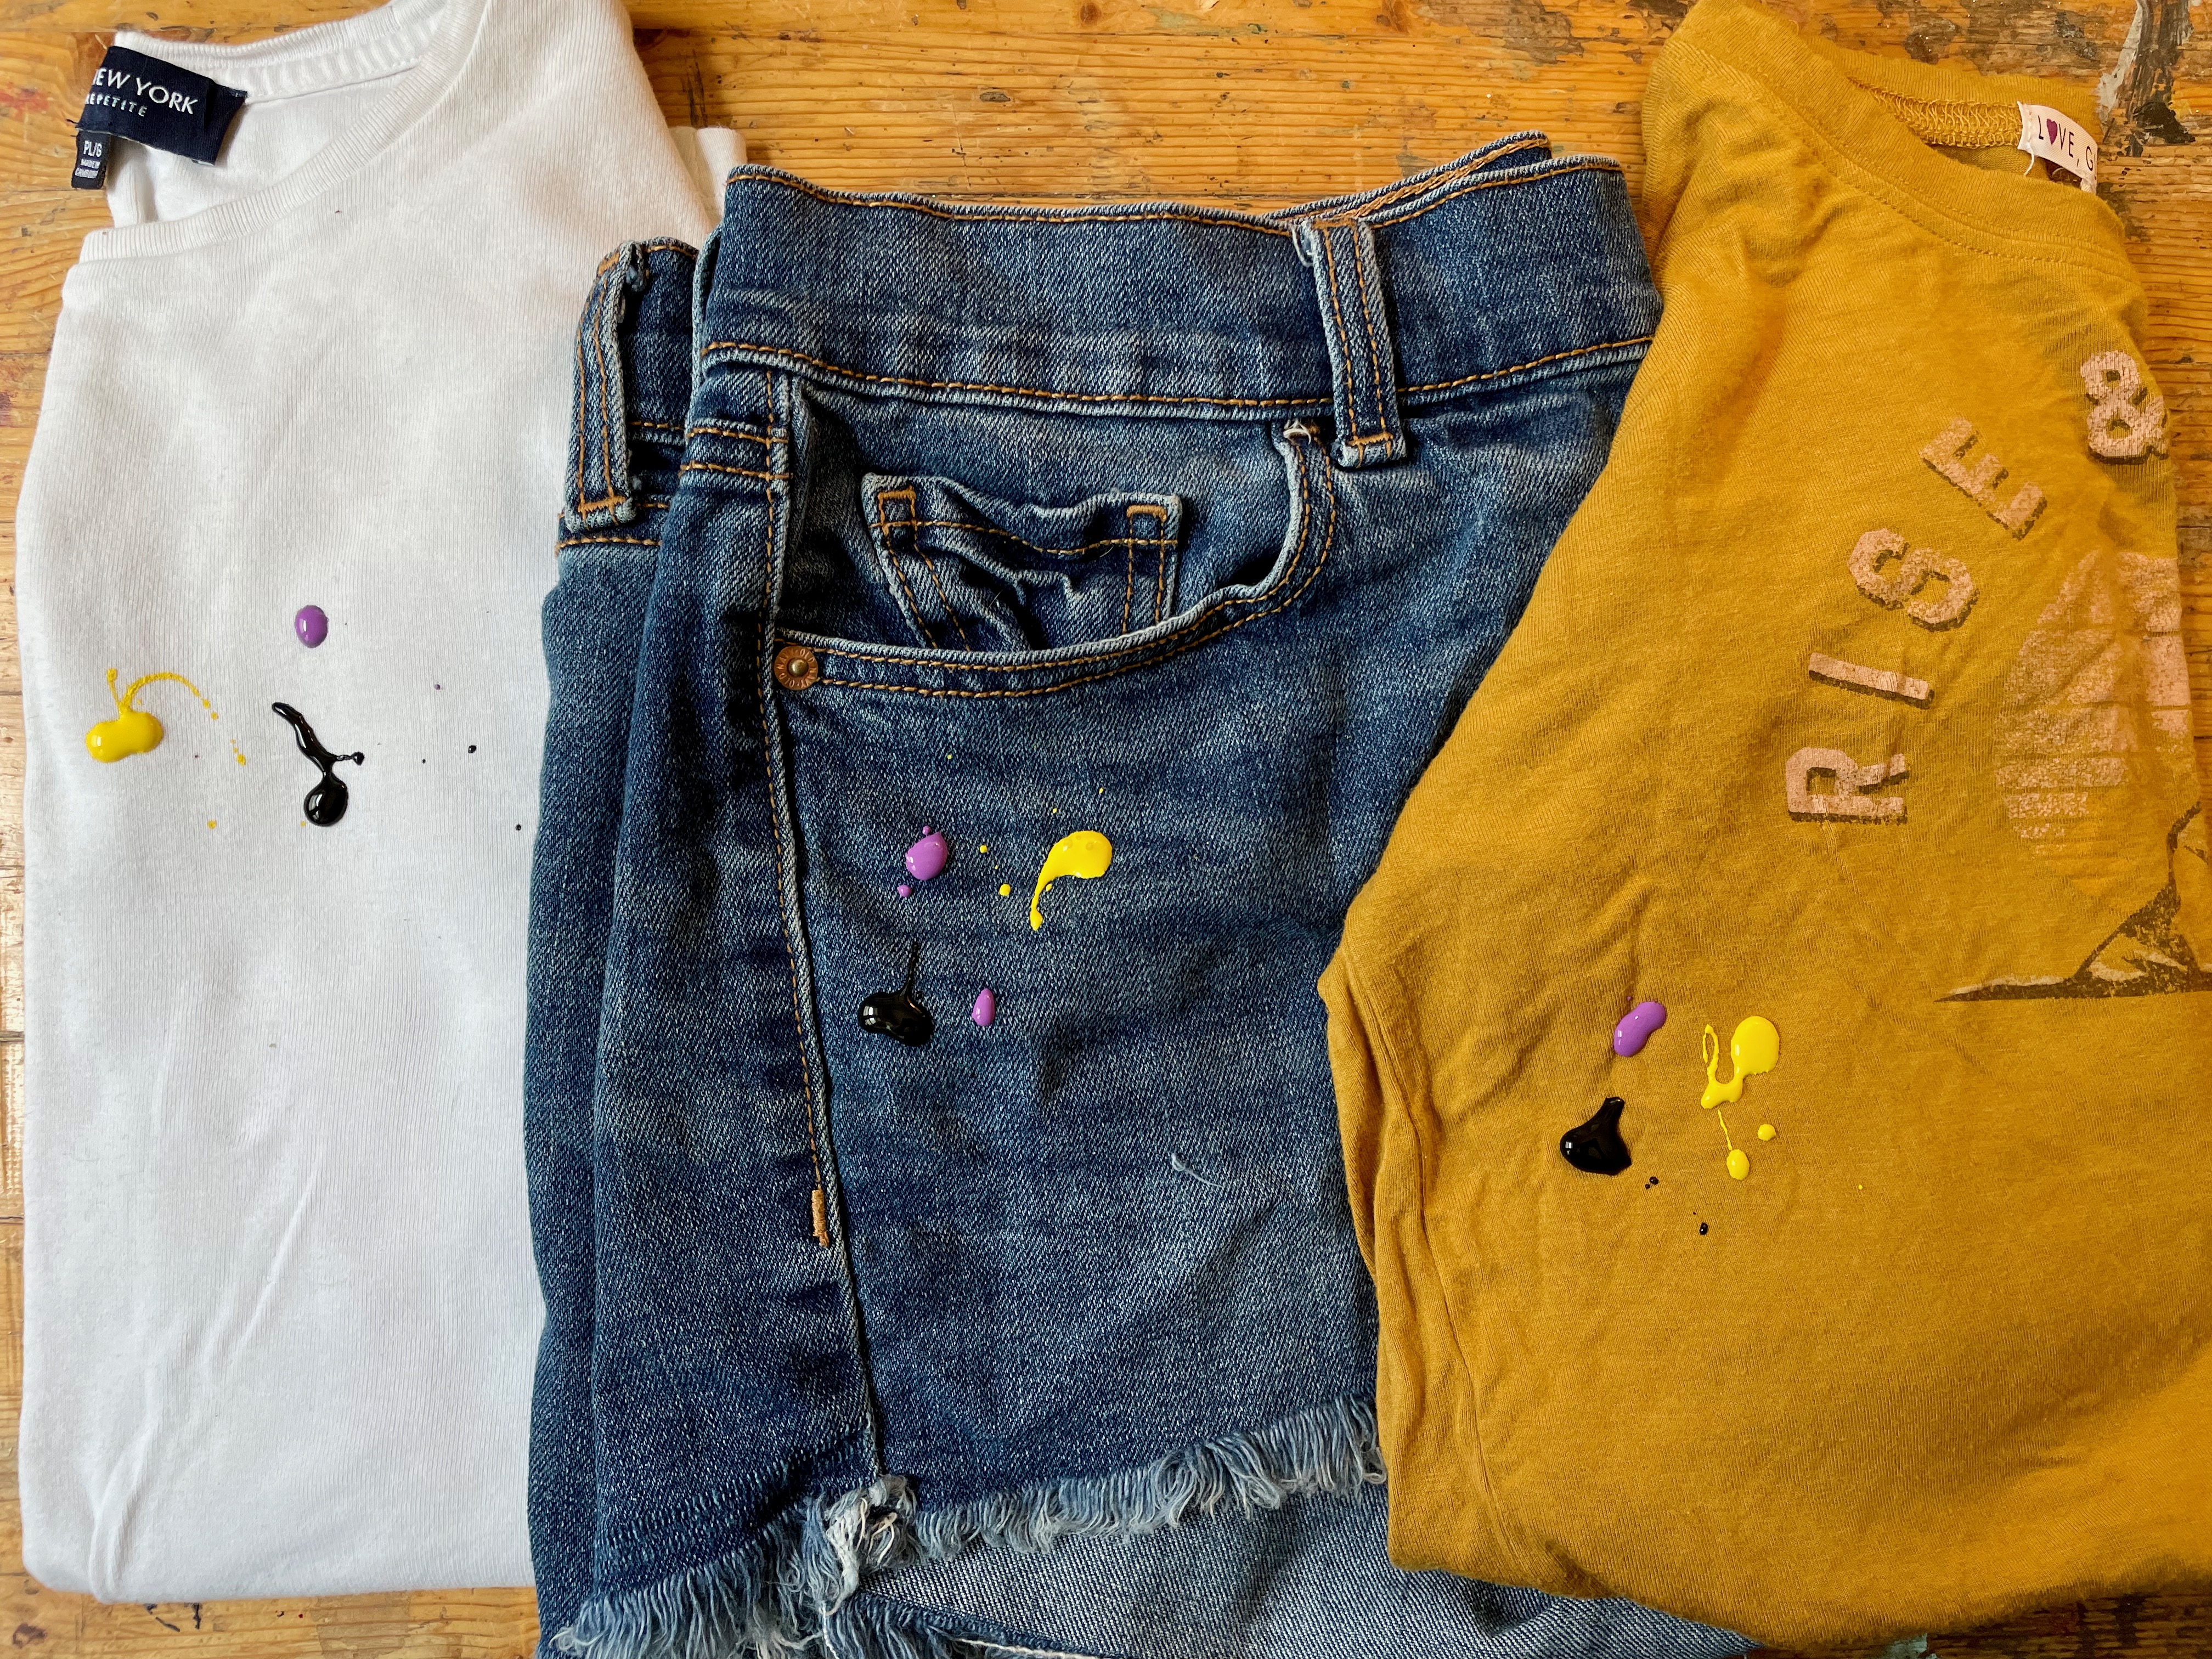 Summer Series: How to Remove Paint from Clothing